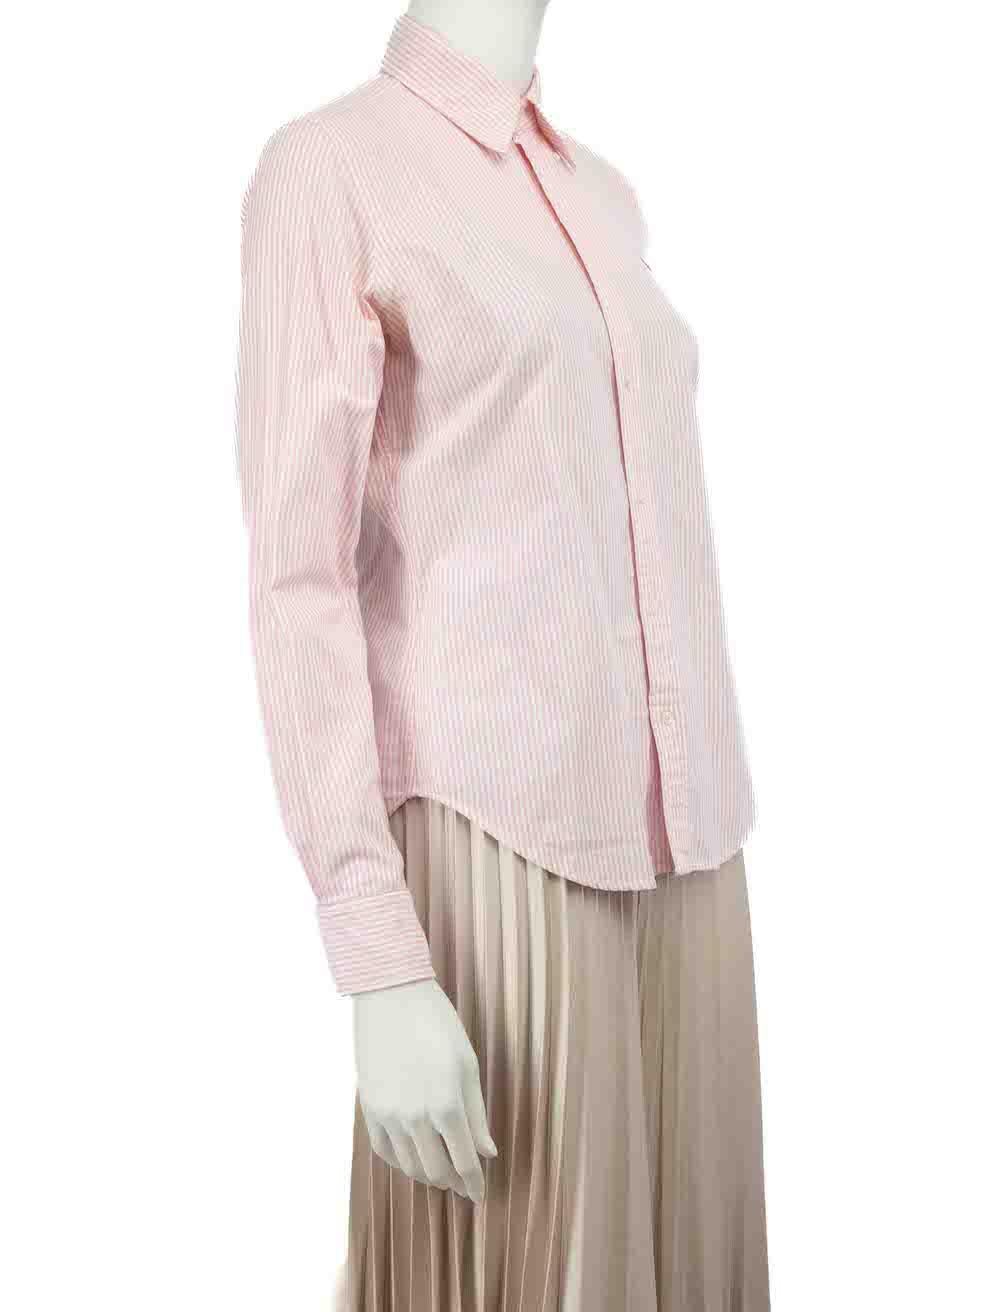 CONDITION is Good. Minor wear to shirt is evident. Light wear to underarms where discolouration is evident. A small red stain is visible to centre front on this used Ralph Lauren designer resale item.
 
 Details
 Pink
 Cotton
 Shirt
 Striped